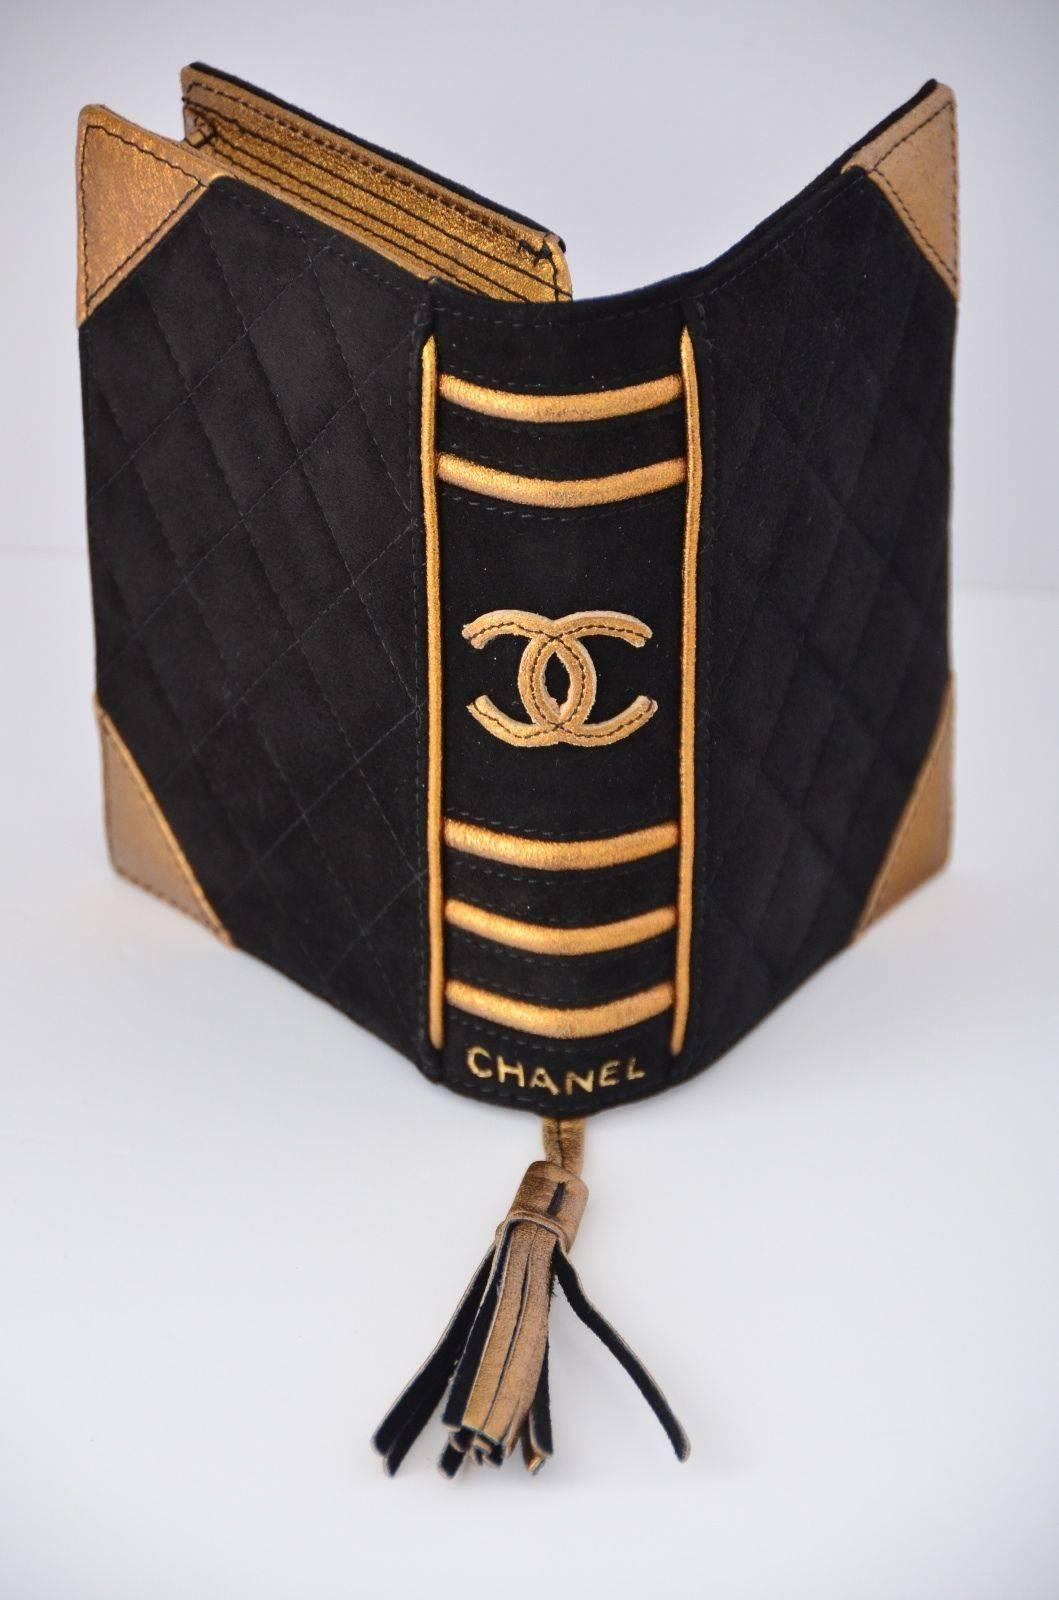 CHANEL BIBLE CLUTCH BOOK SUEDE LEATHER COLLECTOR'S ITEM LIMITED EDITION 2003

Black/gold suede quilted 'bible' clutch. Black suede leather with bronze metallic color details. Front flap with hidden magnetic closure. Golden leather tassel.